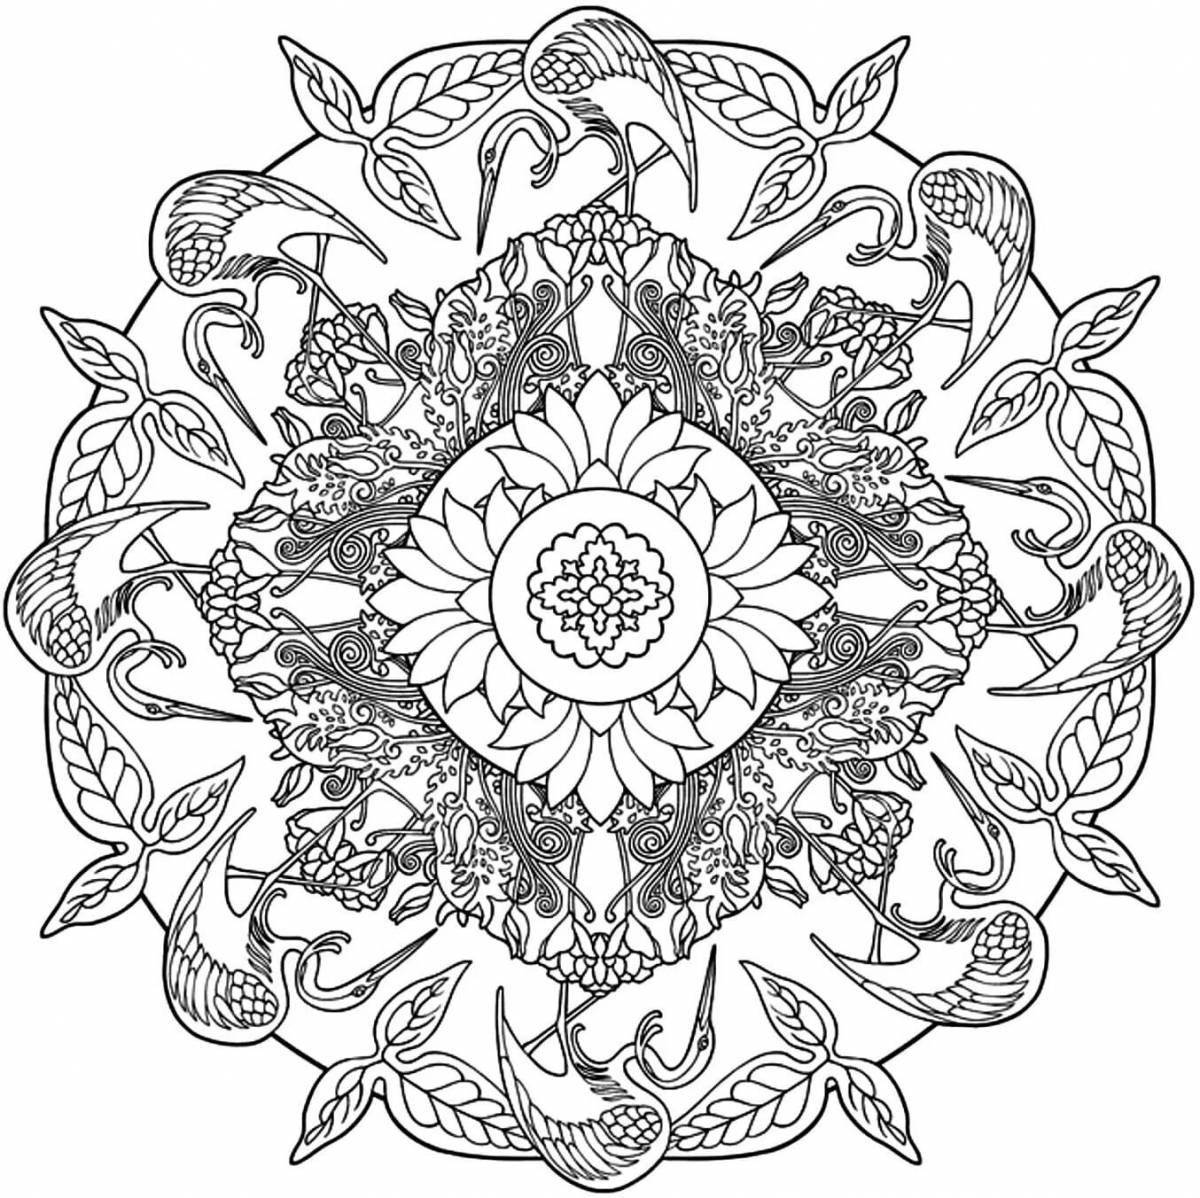 Joyful coloring book for peace of mind